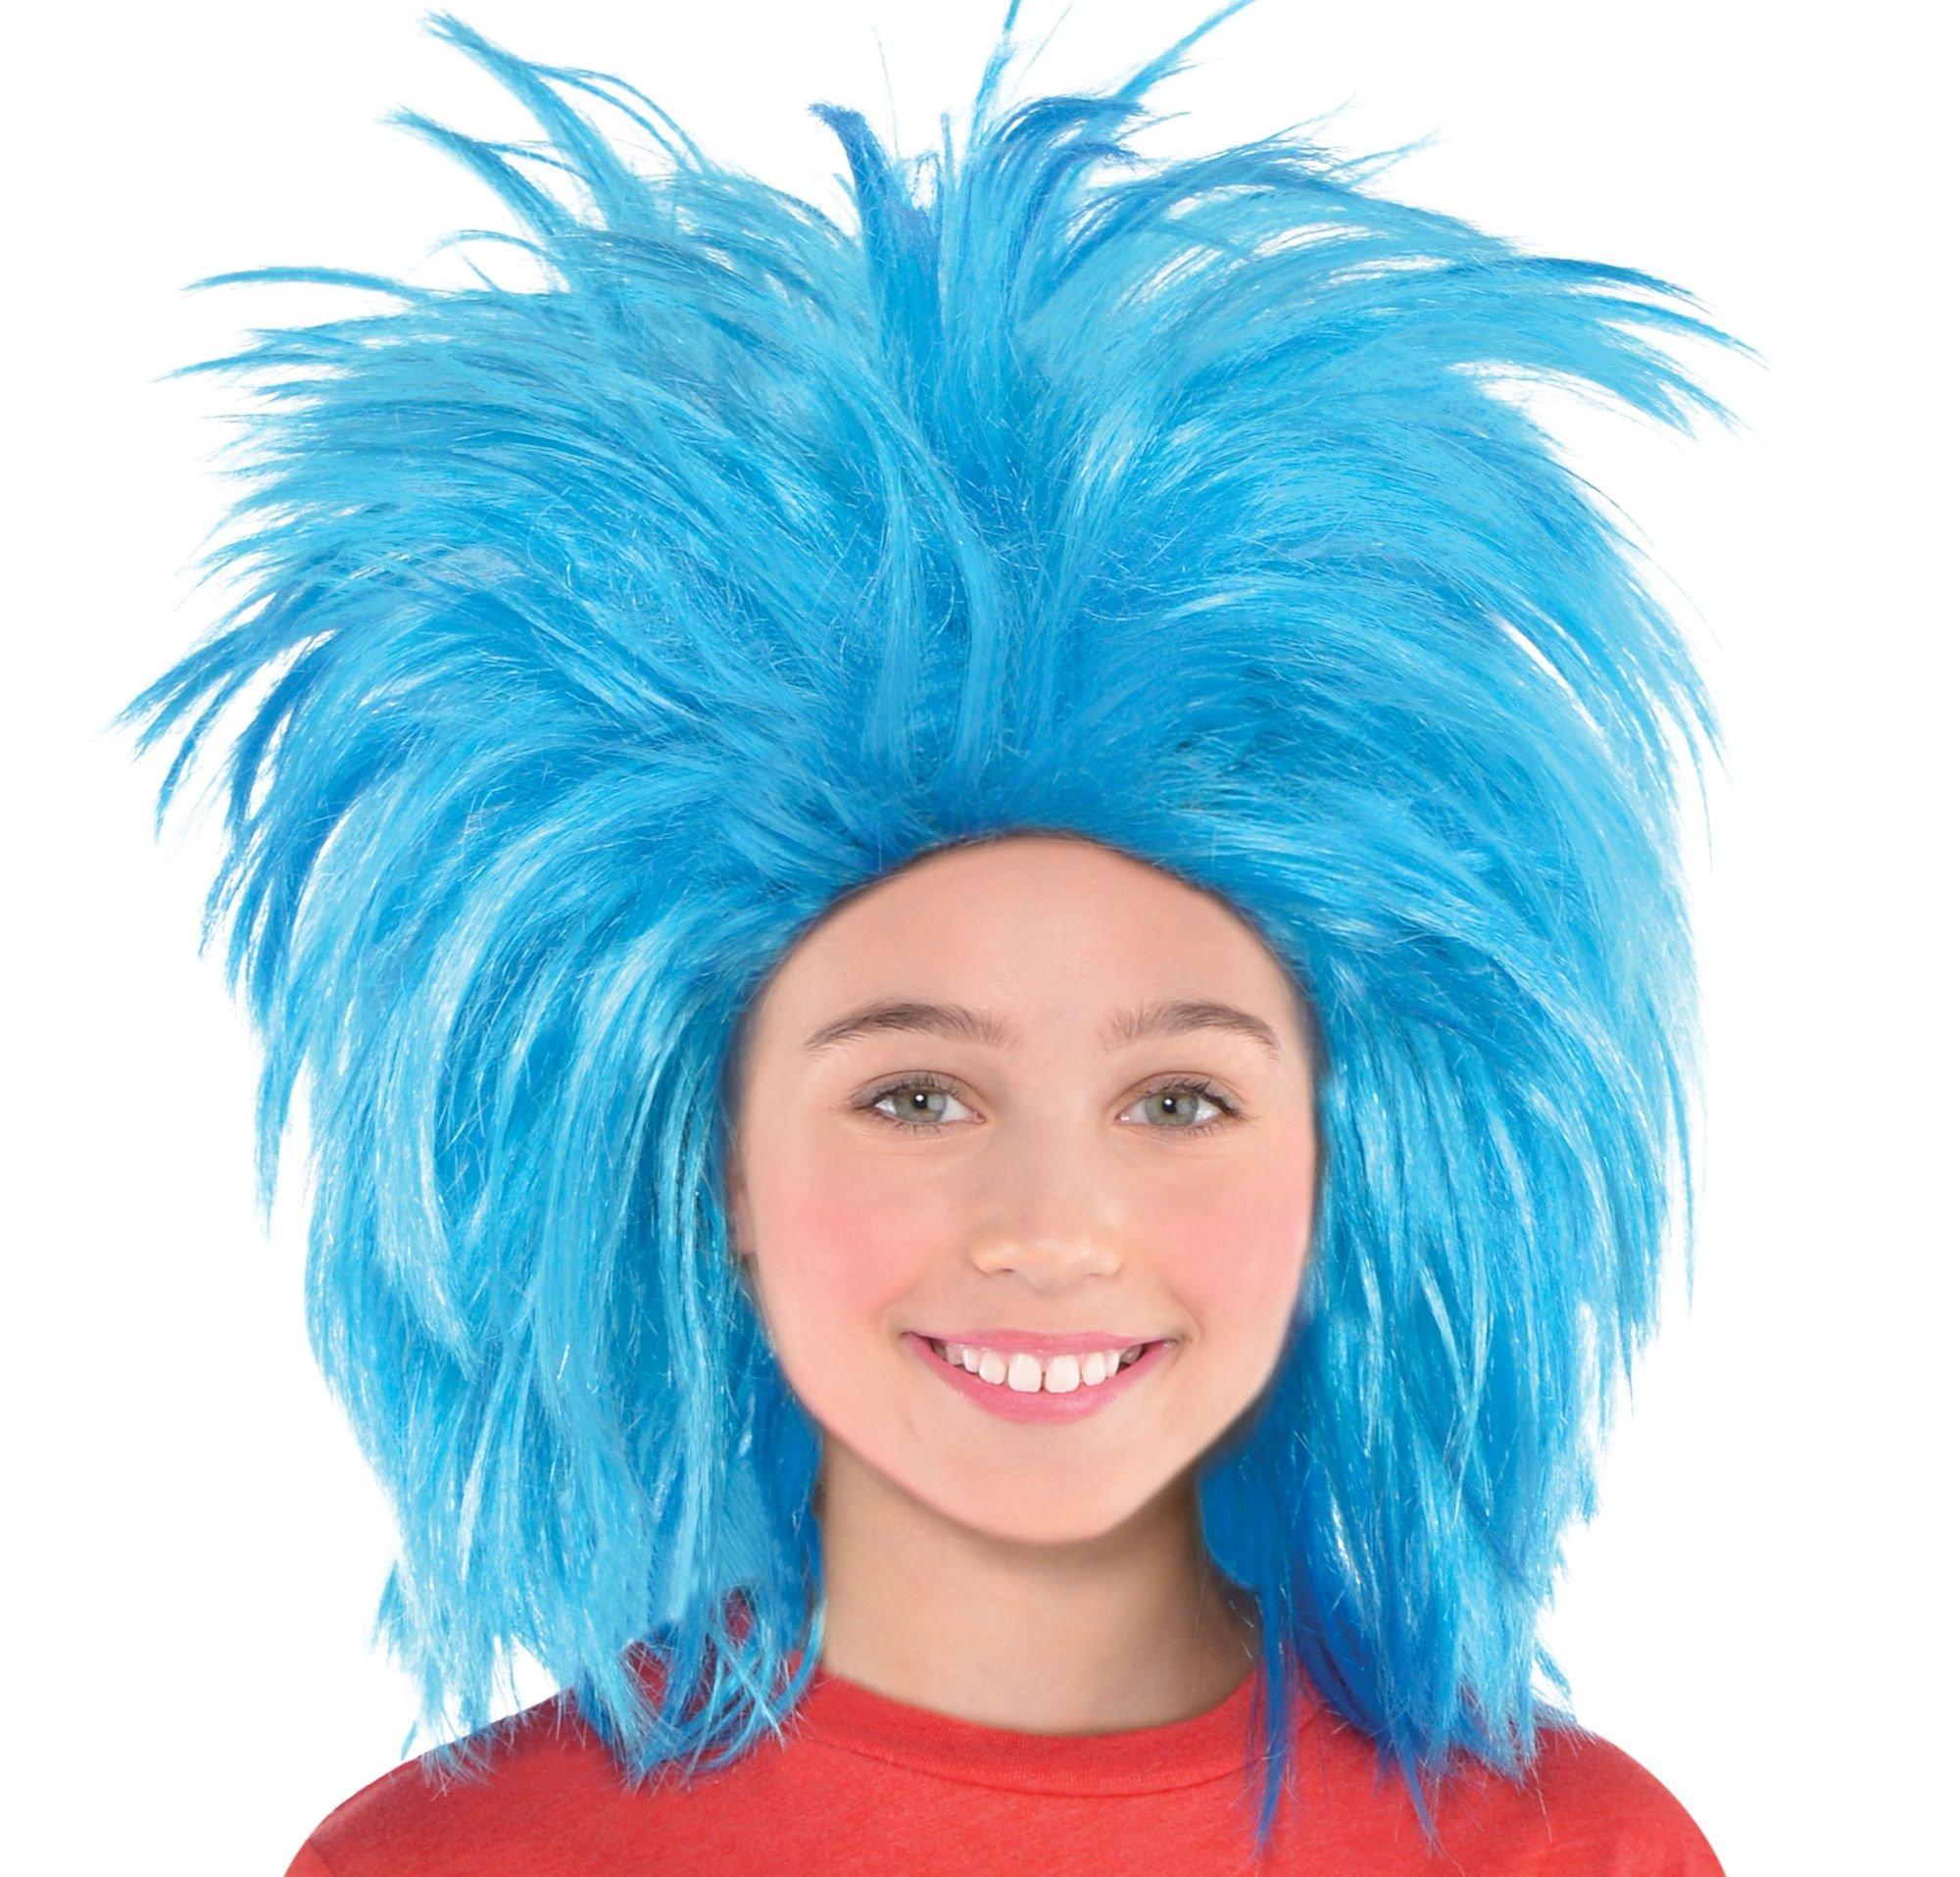 Make a Thing 1 and Thing 2 Wig for your DIY Halloween Costume - Morena's  Corner